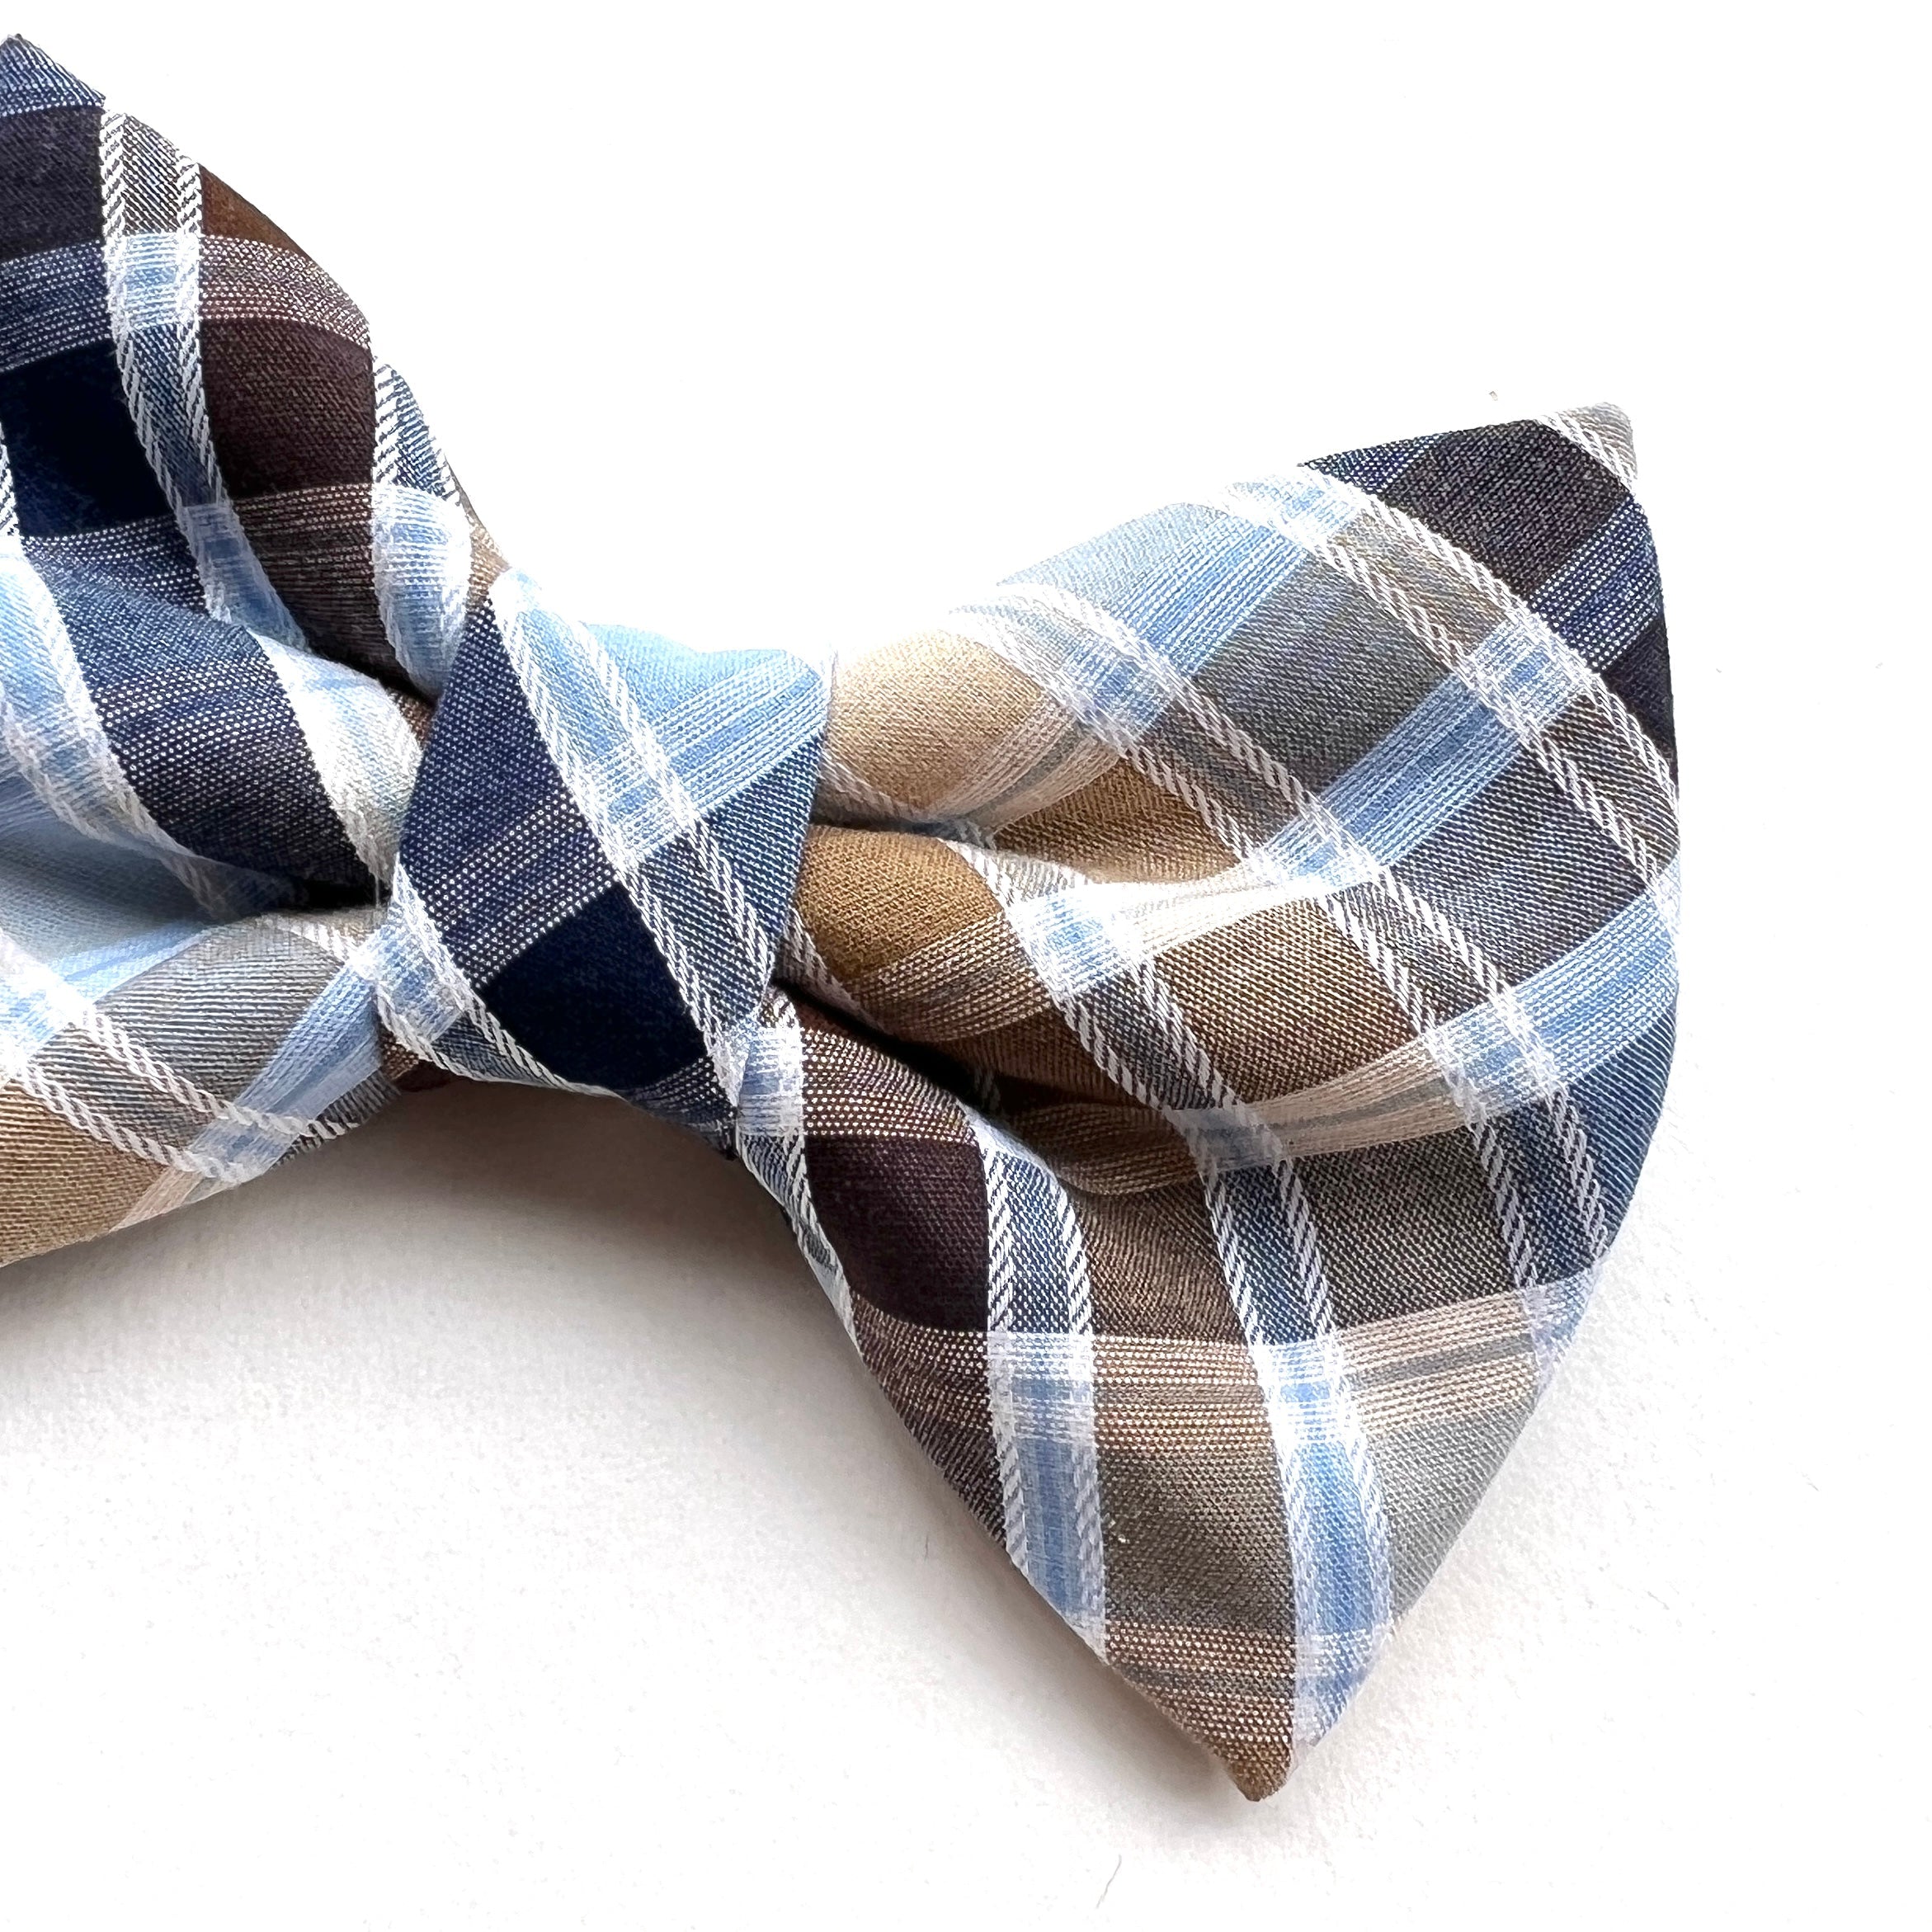 DRIFTWOOD - Bowtie Standard & Large // READY TO SHIP